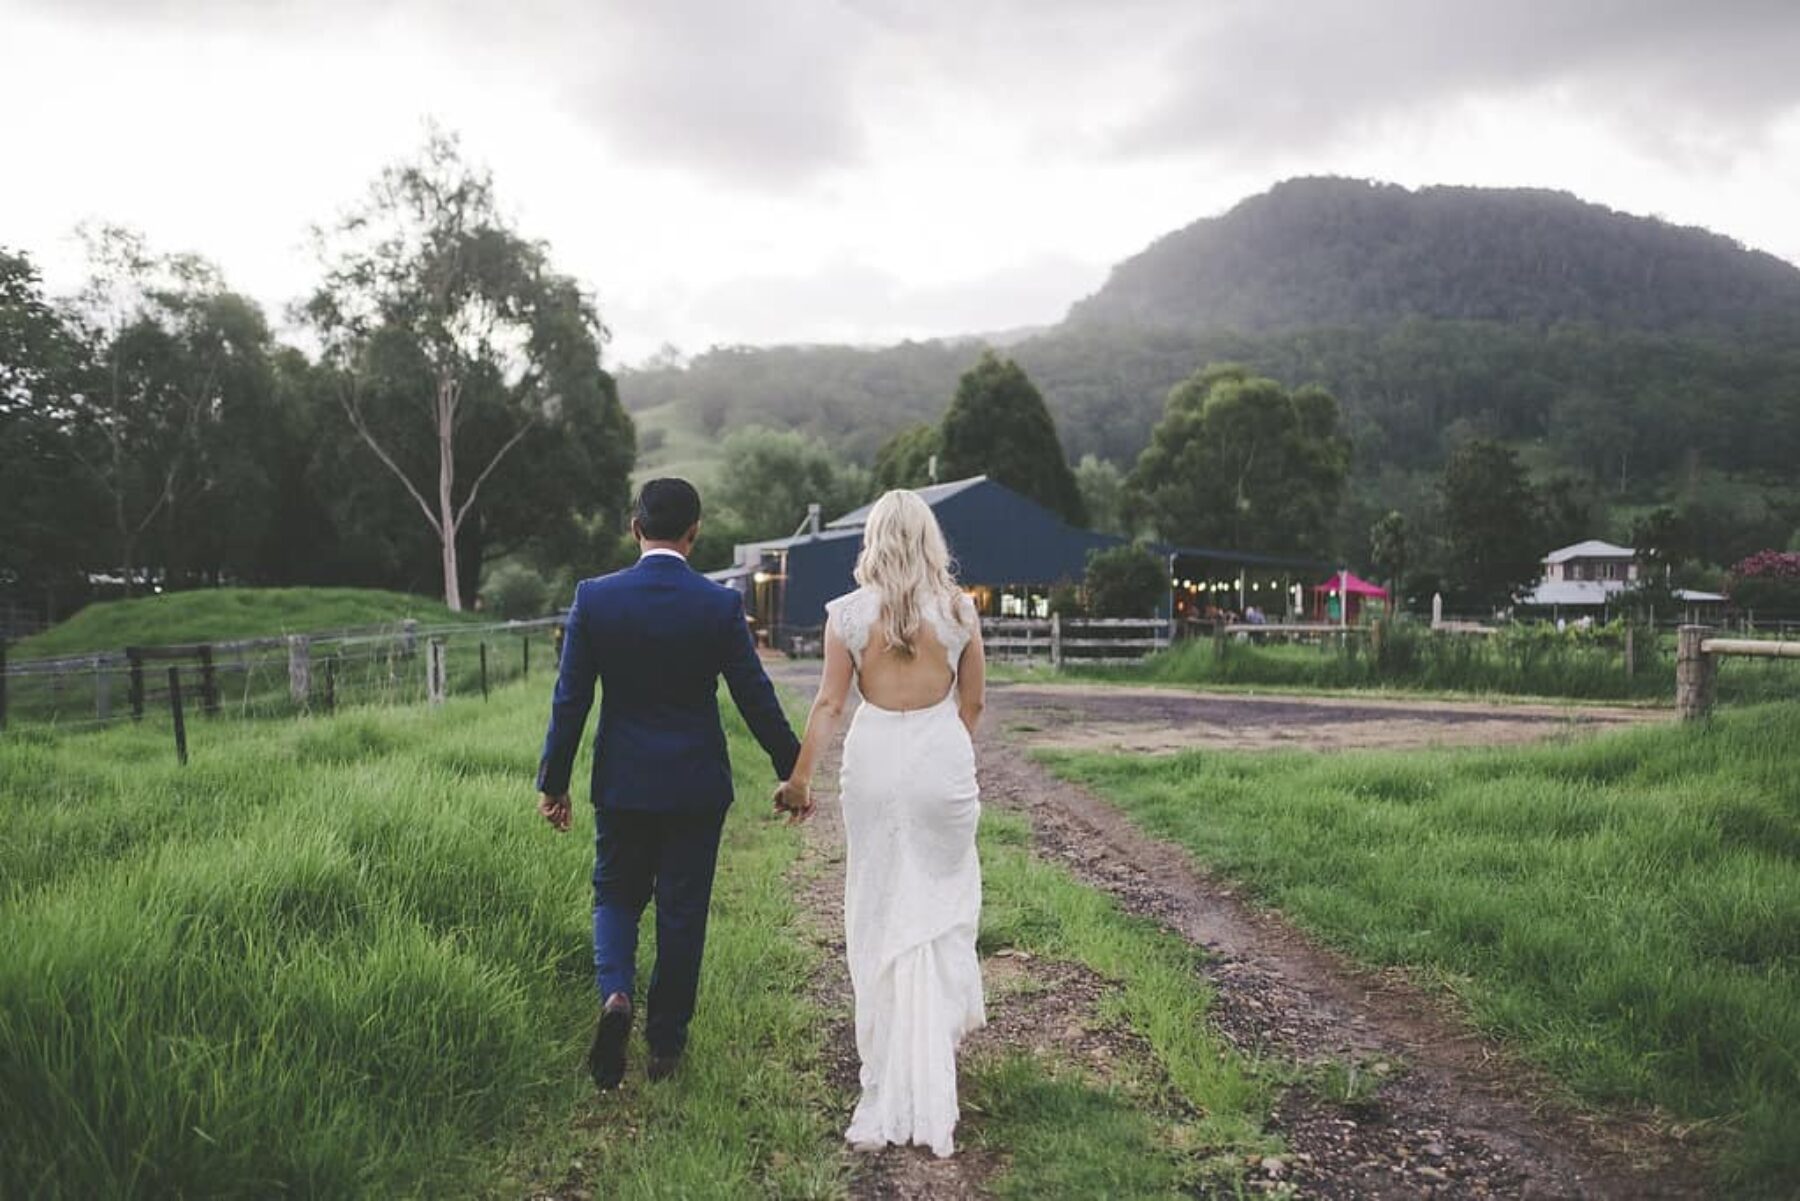 Melross Farm wedding in Kangaroo Valley - photography by Athena Grace